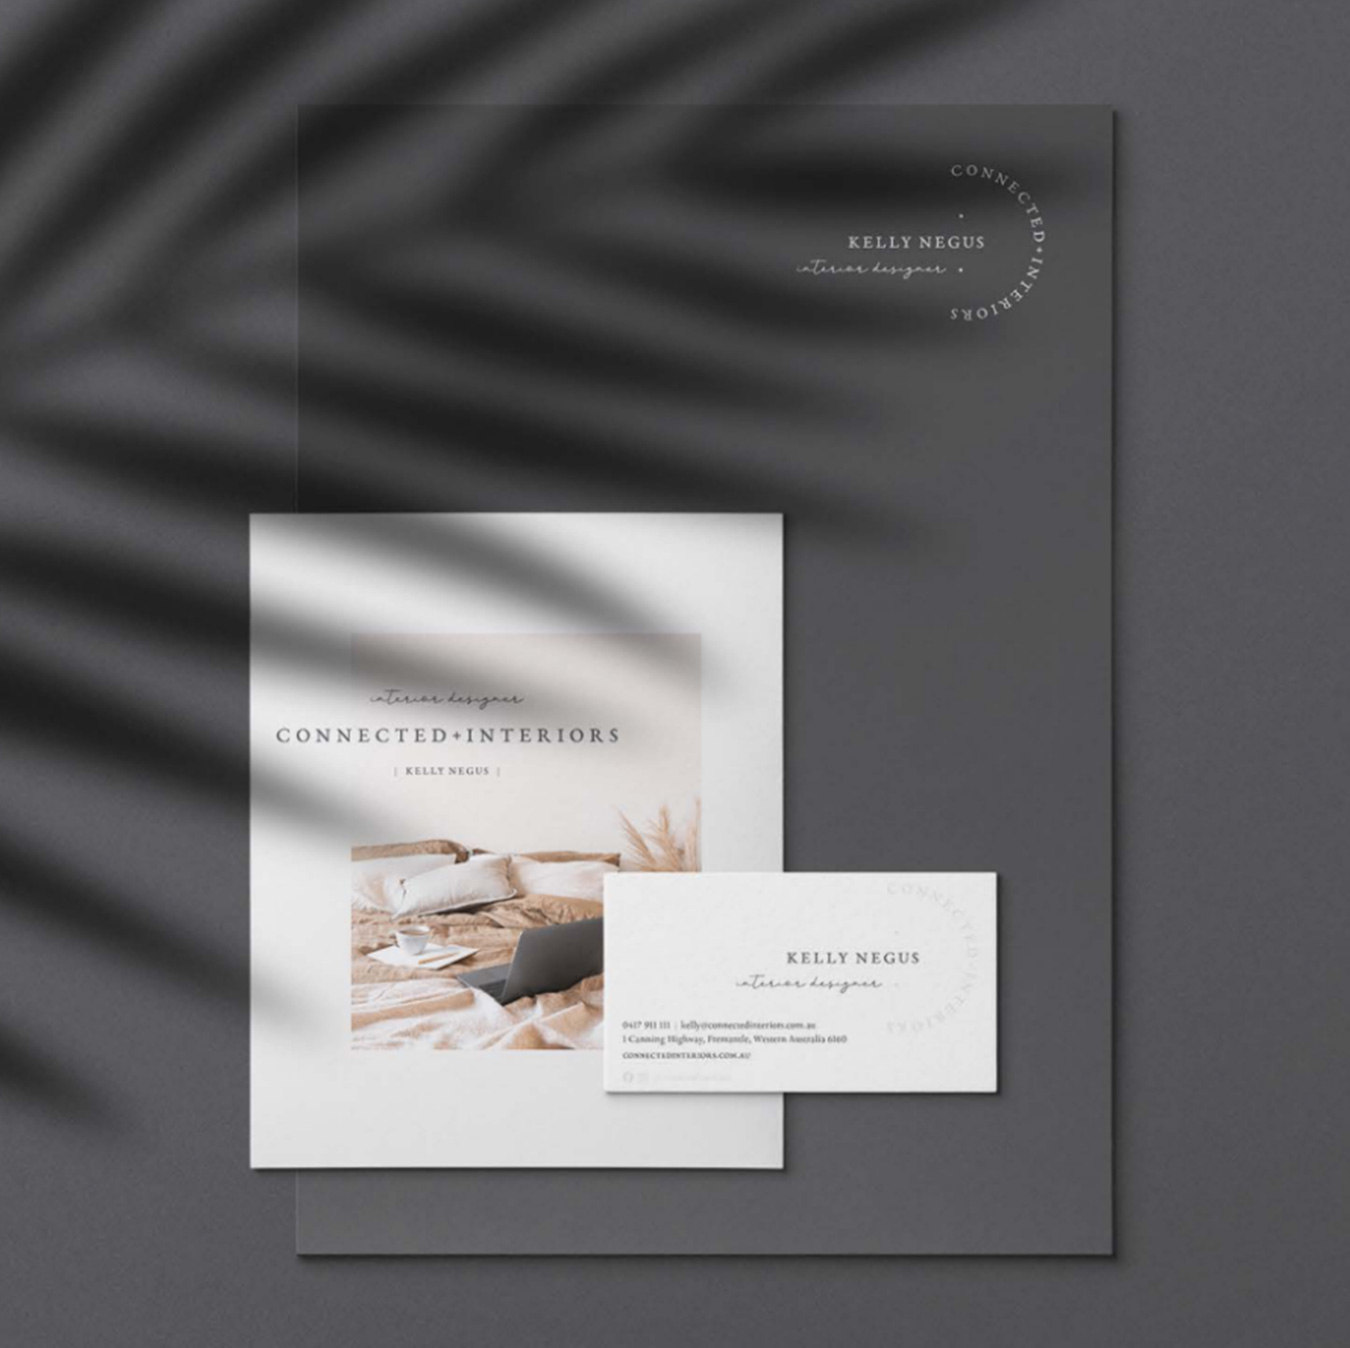 Connected Interiors Branding & Squarespace Website Design by TL Design Co.